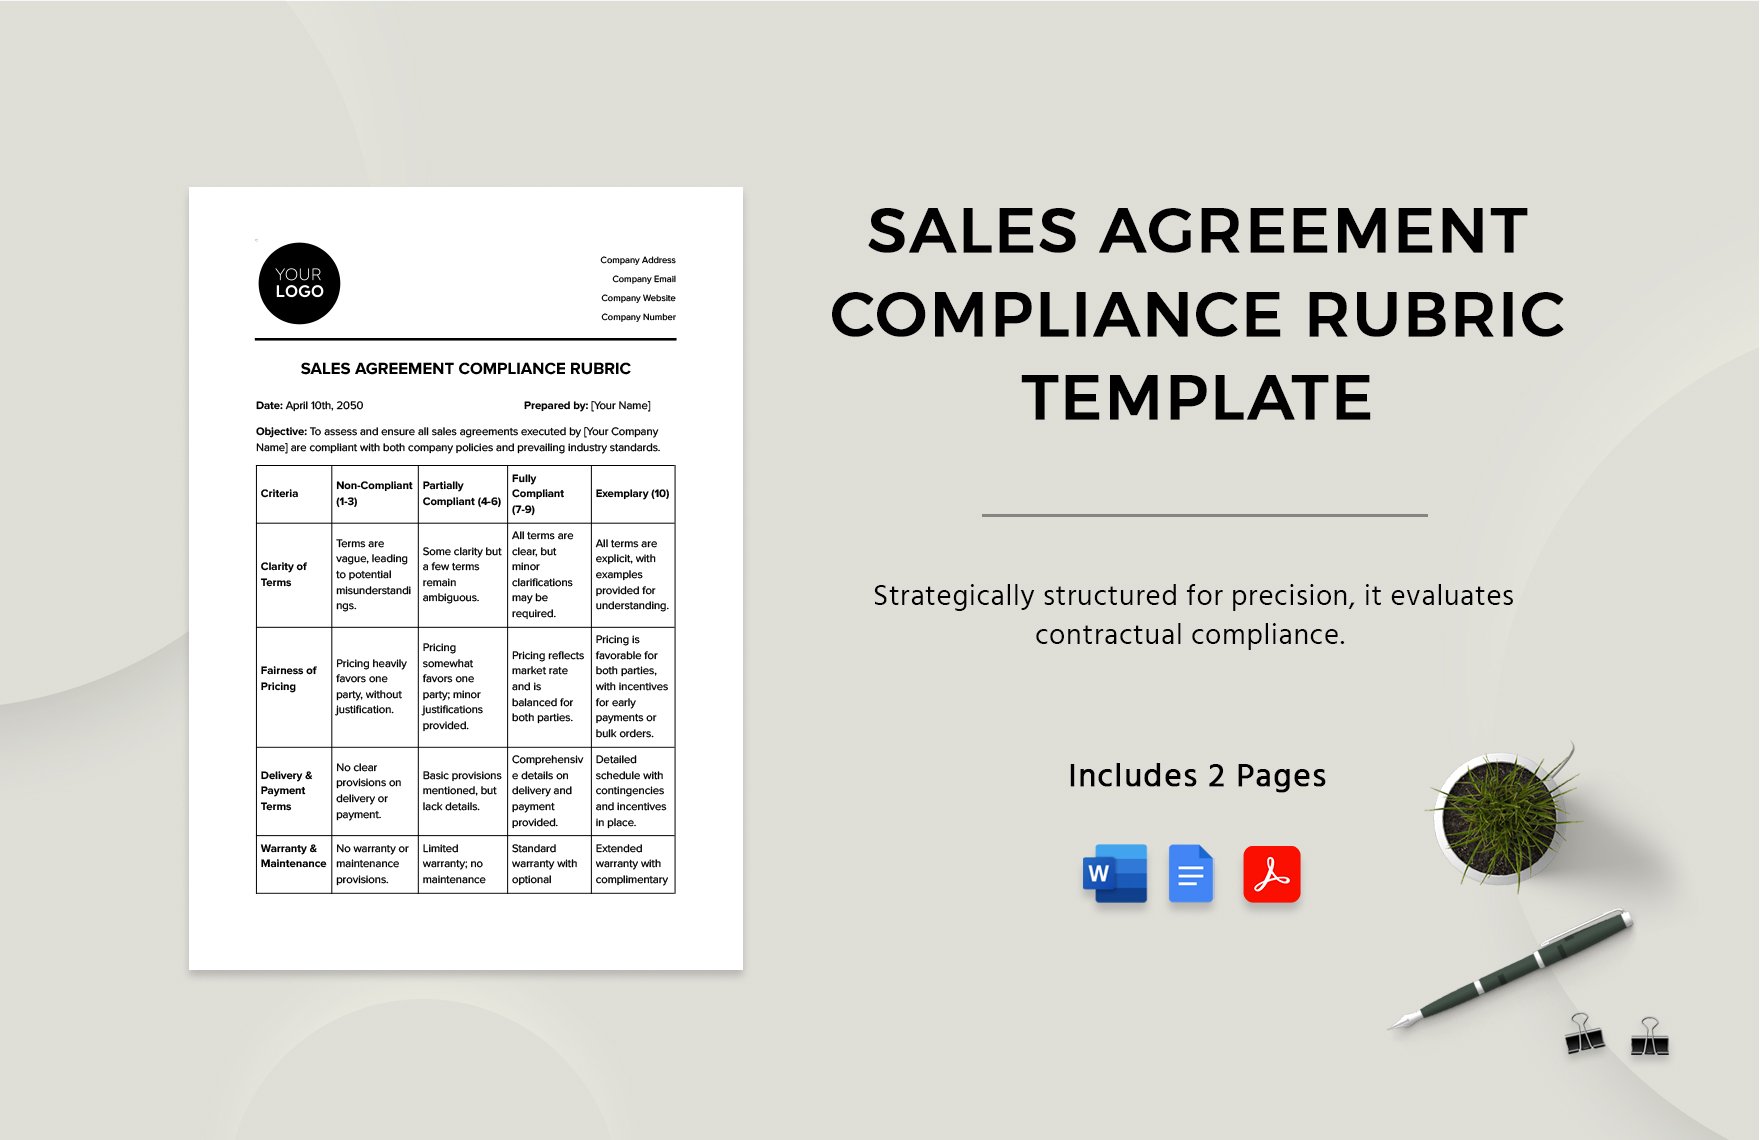 Sales Agreement Compliance Rubric Template in Word, Google Docs, PDF